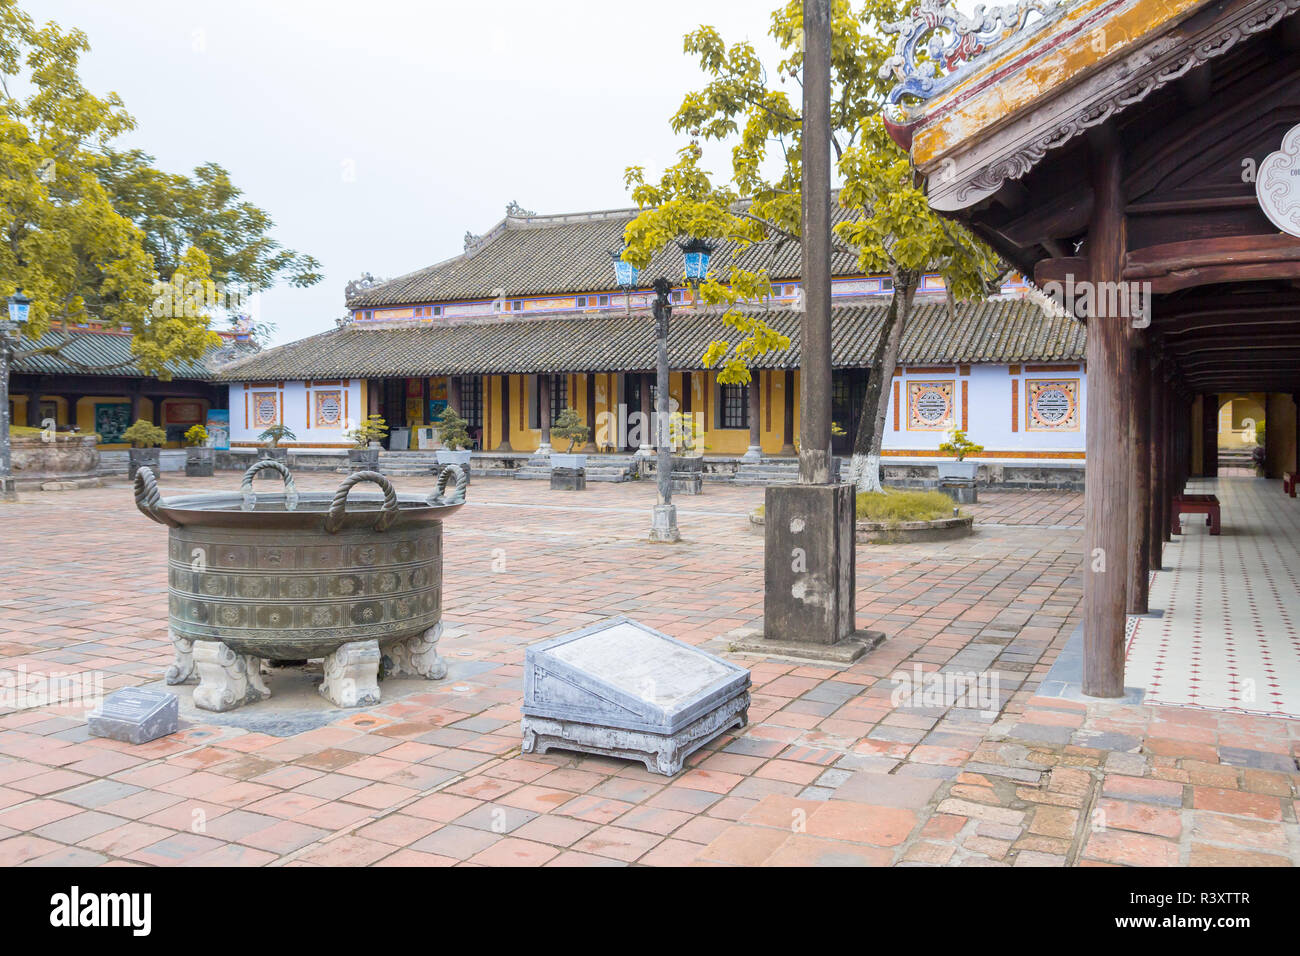 courtyard of imperial city citadel in Hue, Vietnam Stock Photo